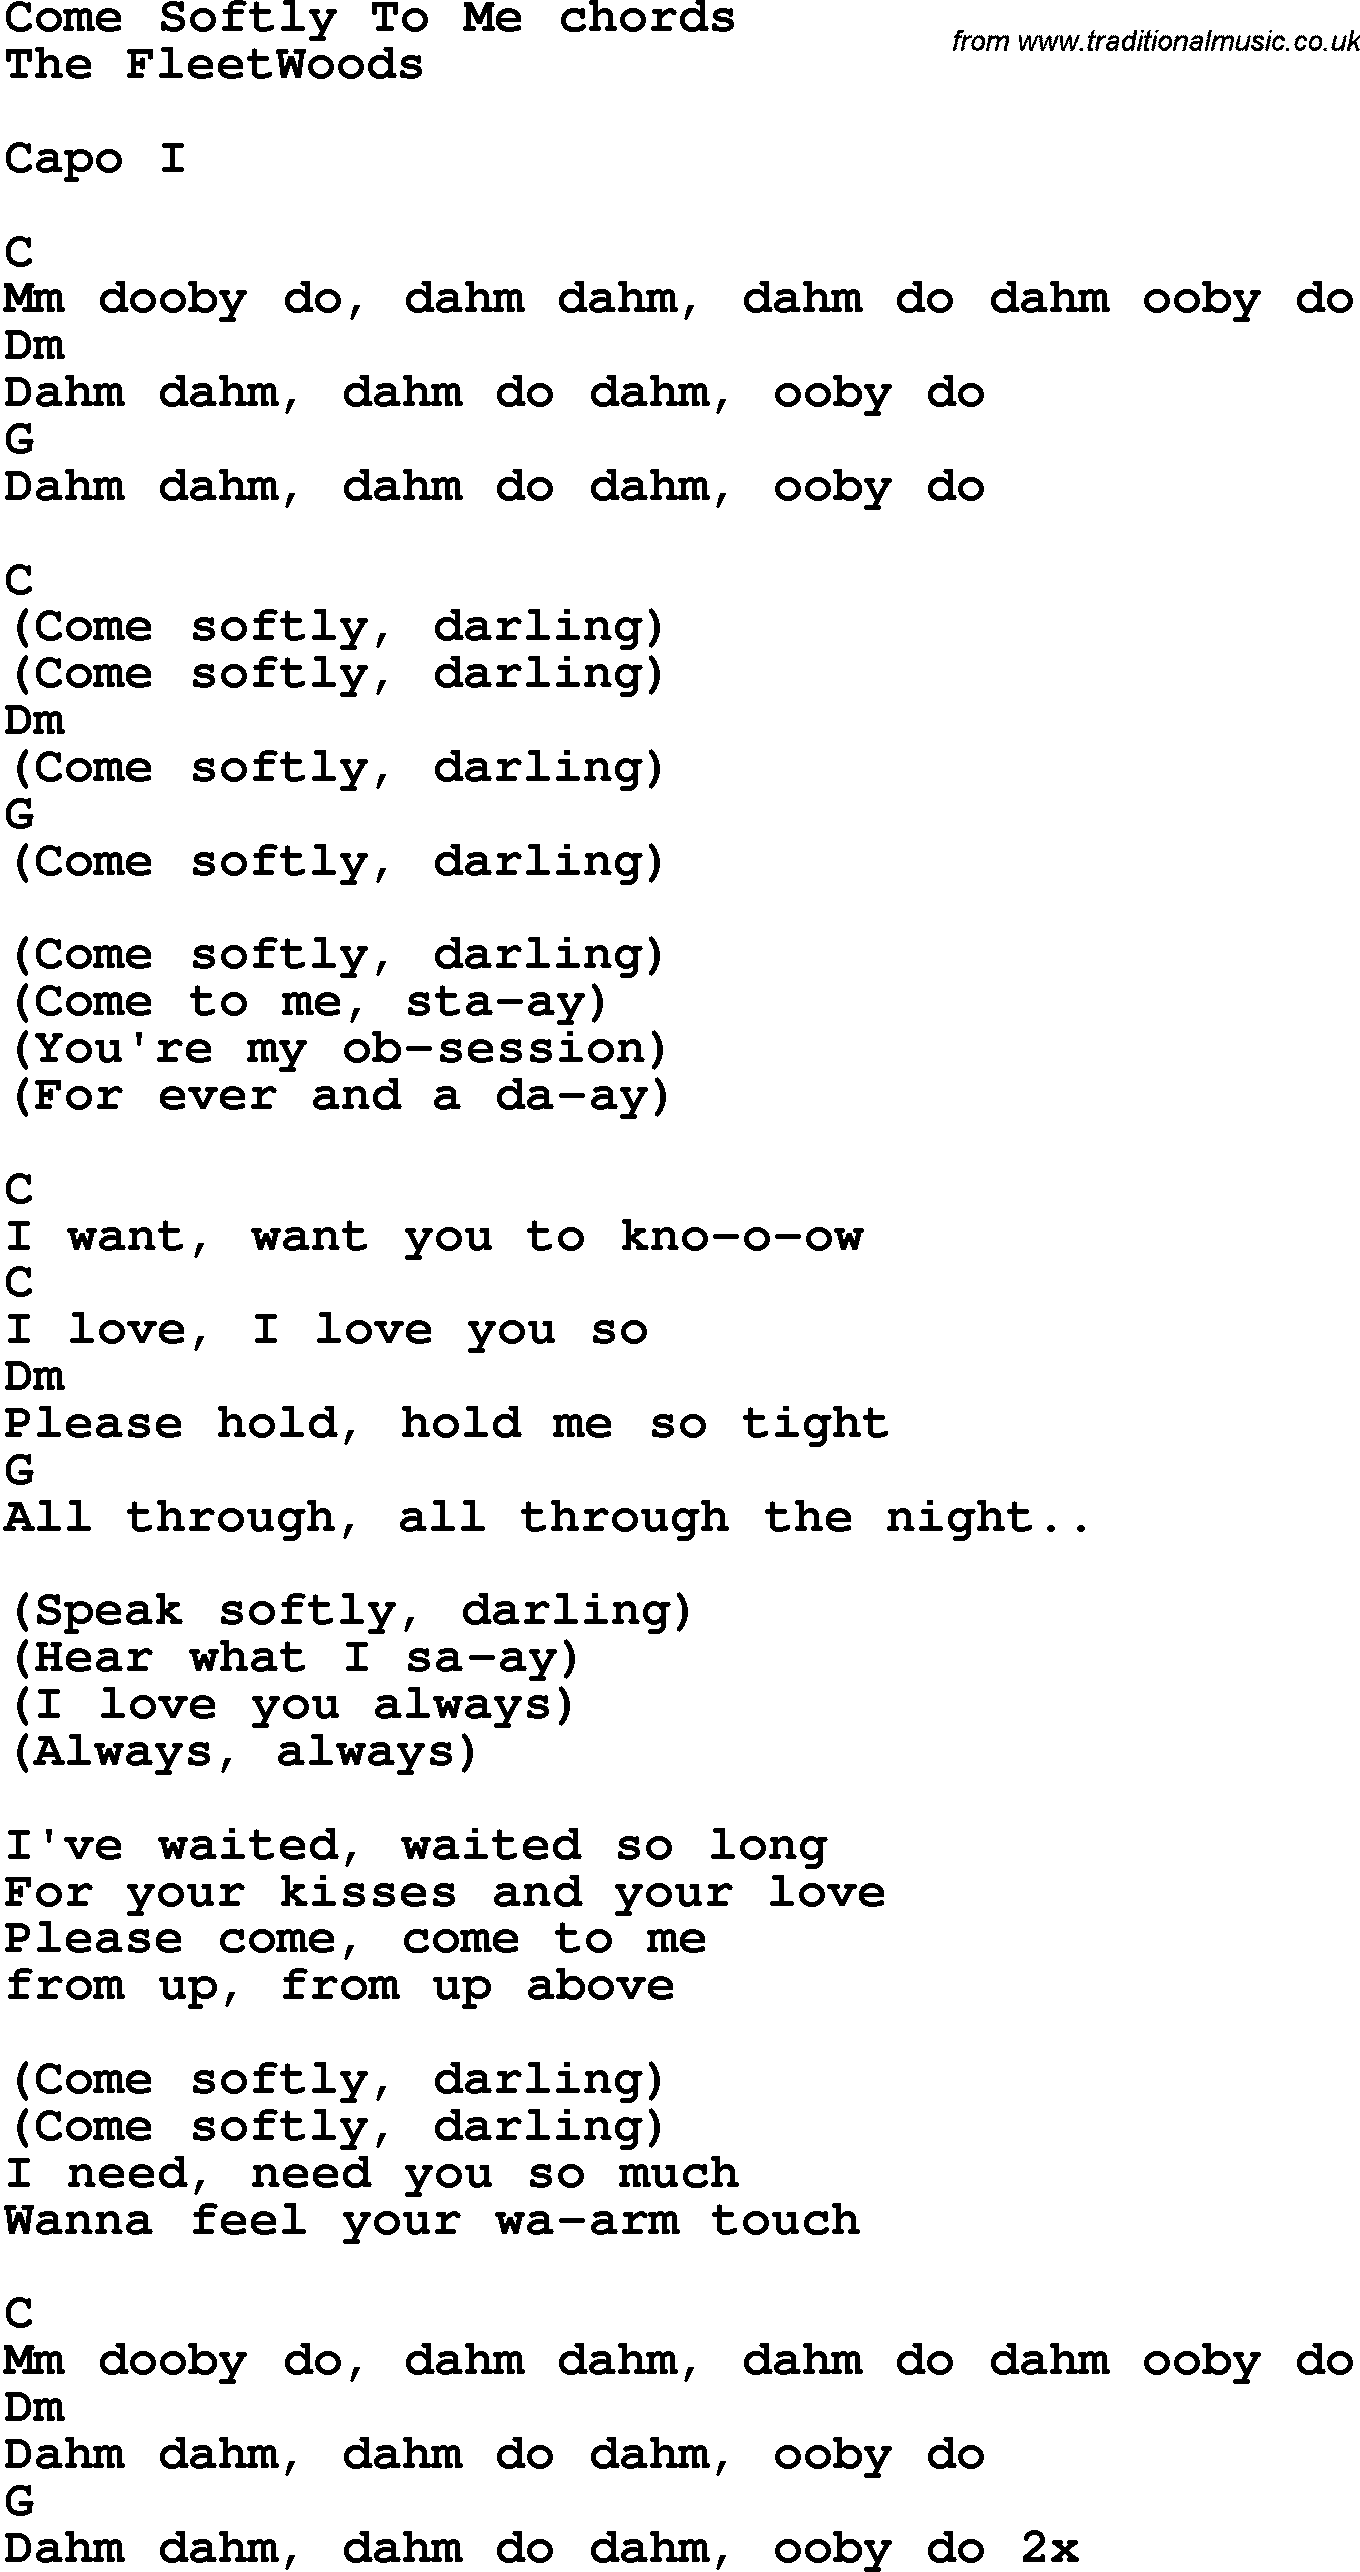 Song Lyrics with guitar chords for Come Softly To Me